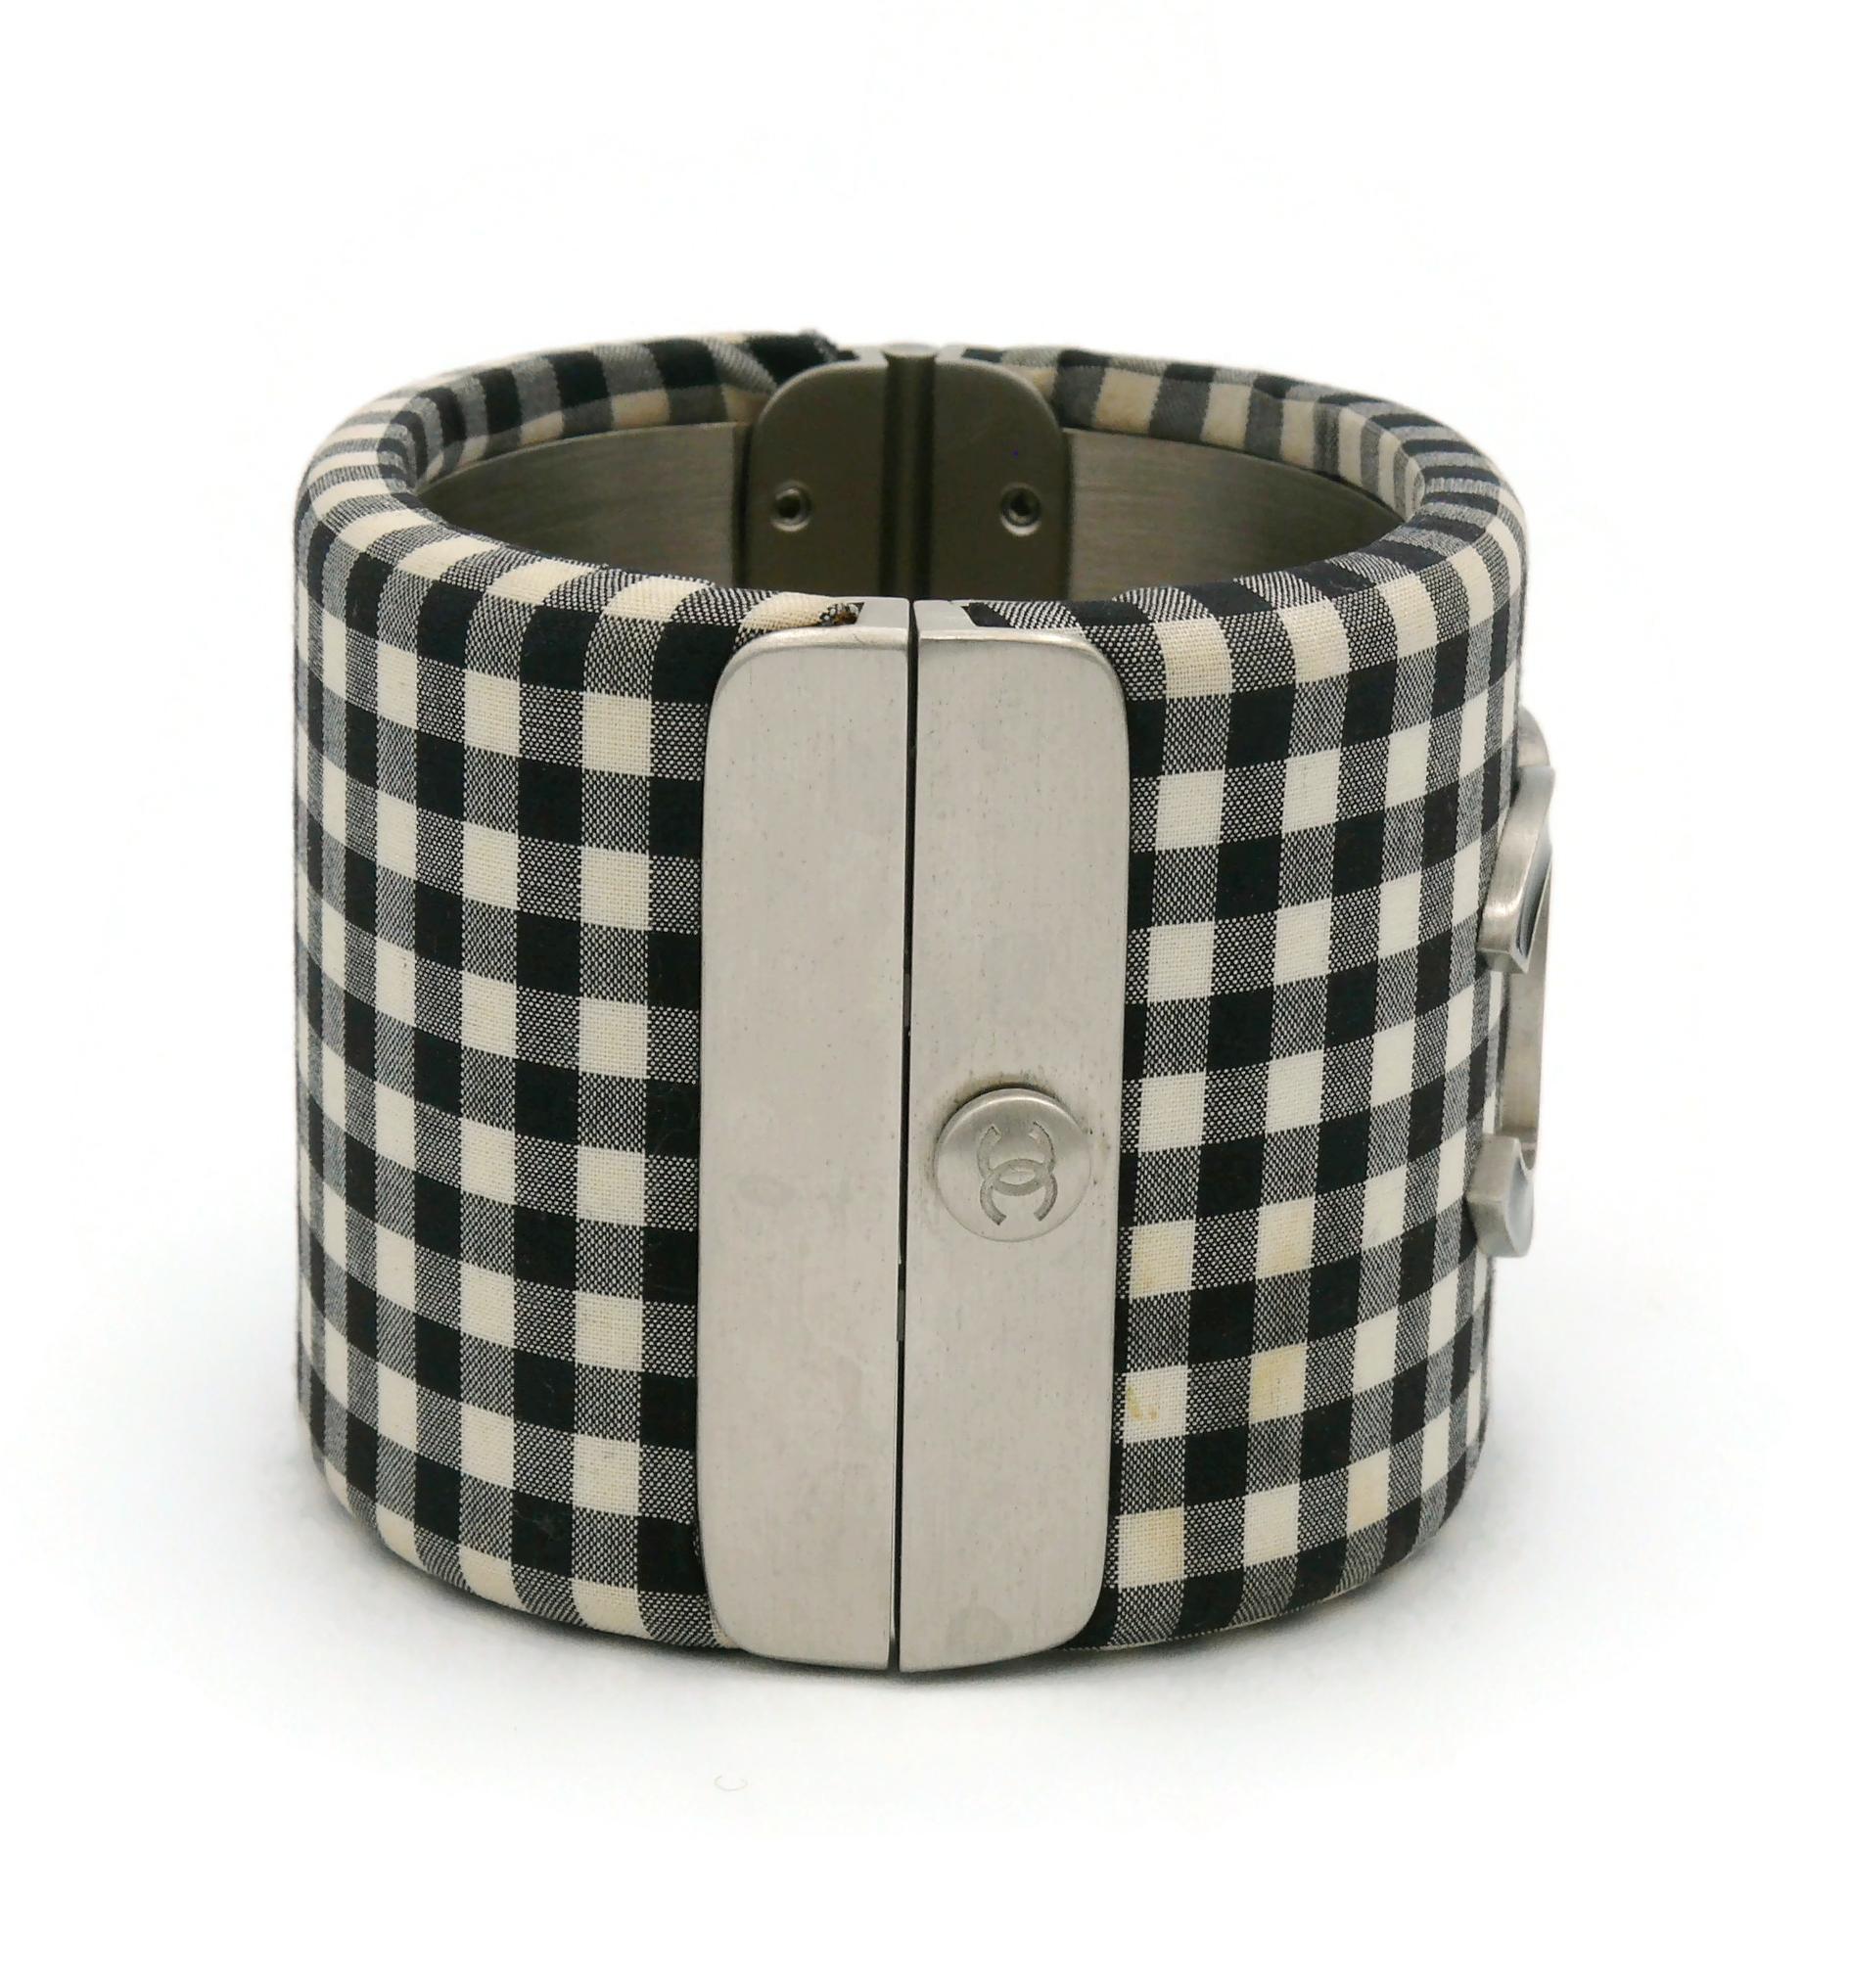 CHANEL Black and White Gingham Vichy Print Cuff Bracelet, Resort Collection 2011 In Good Condition For Sale In Nice, FR